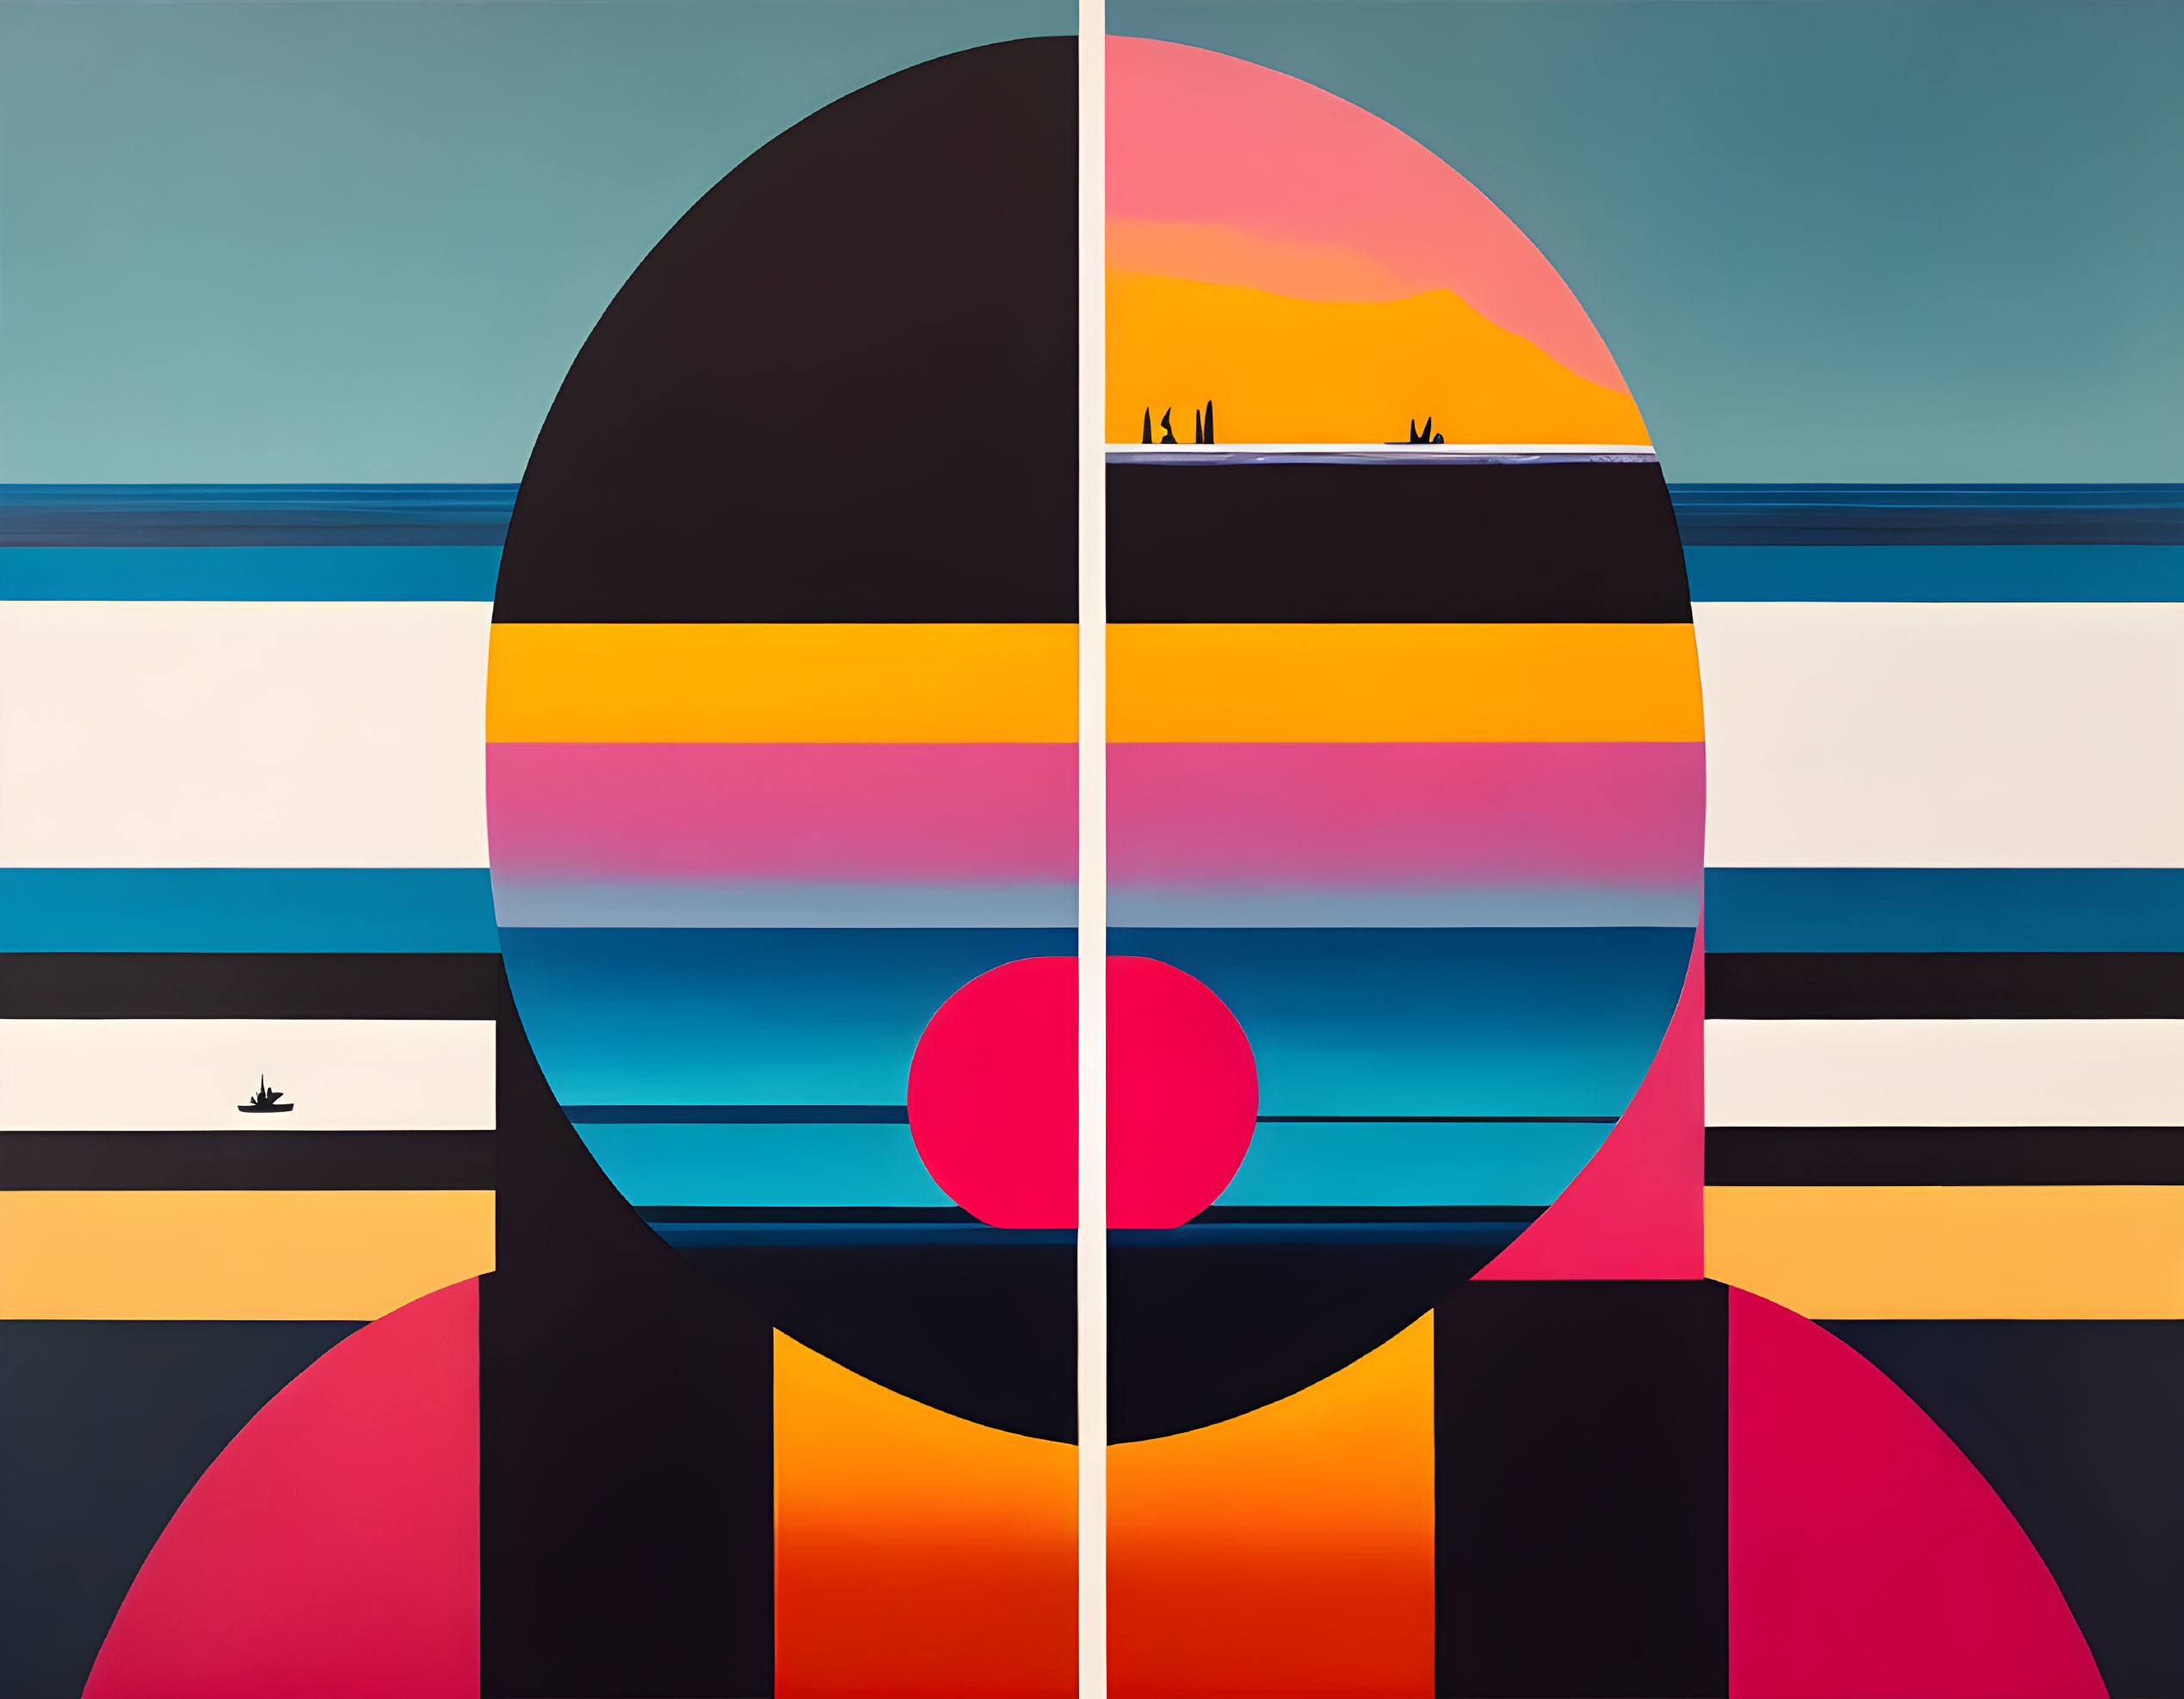 Geometric abstract art: face divided by vertical line, landscape elements, colorful stripes